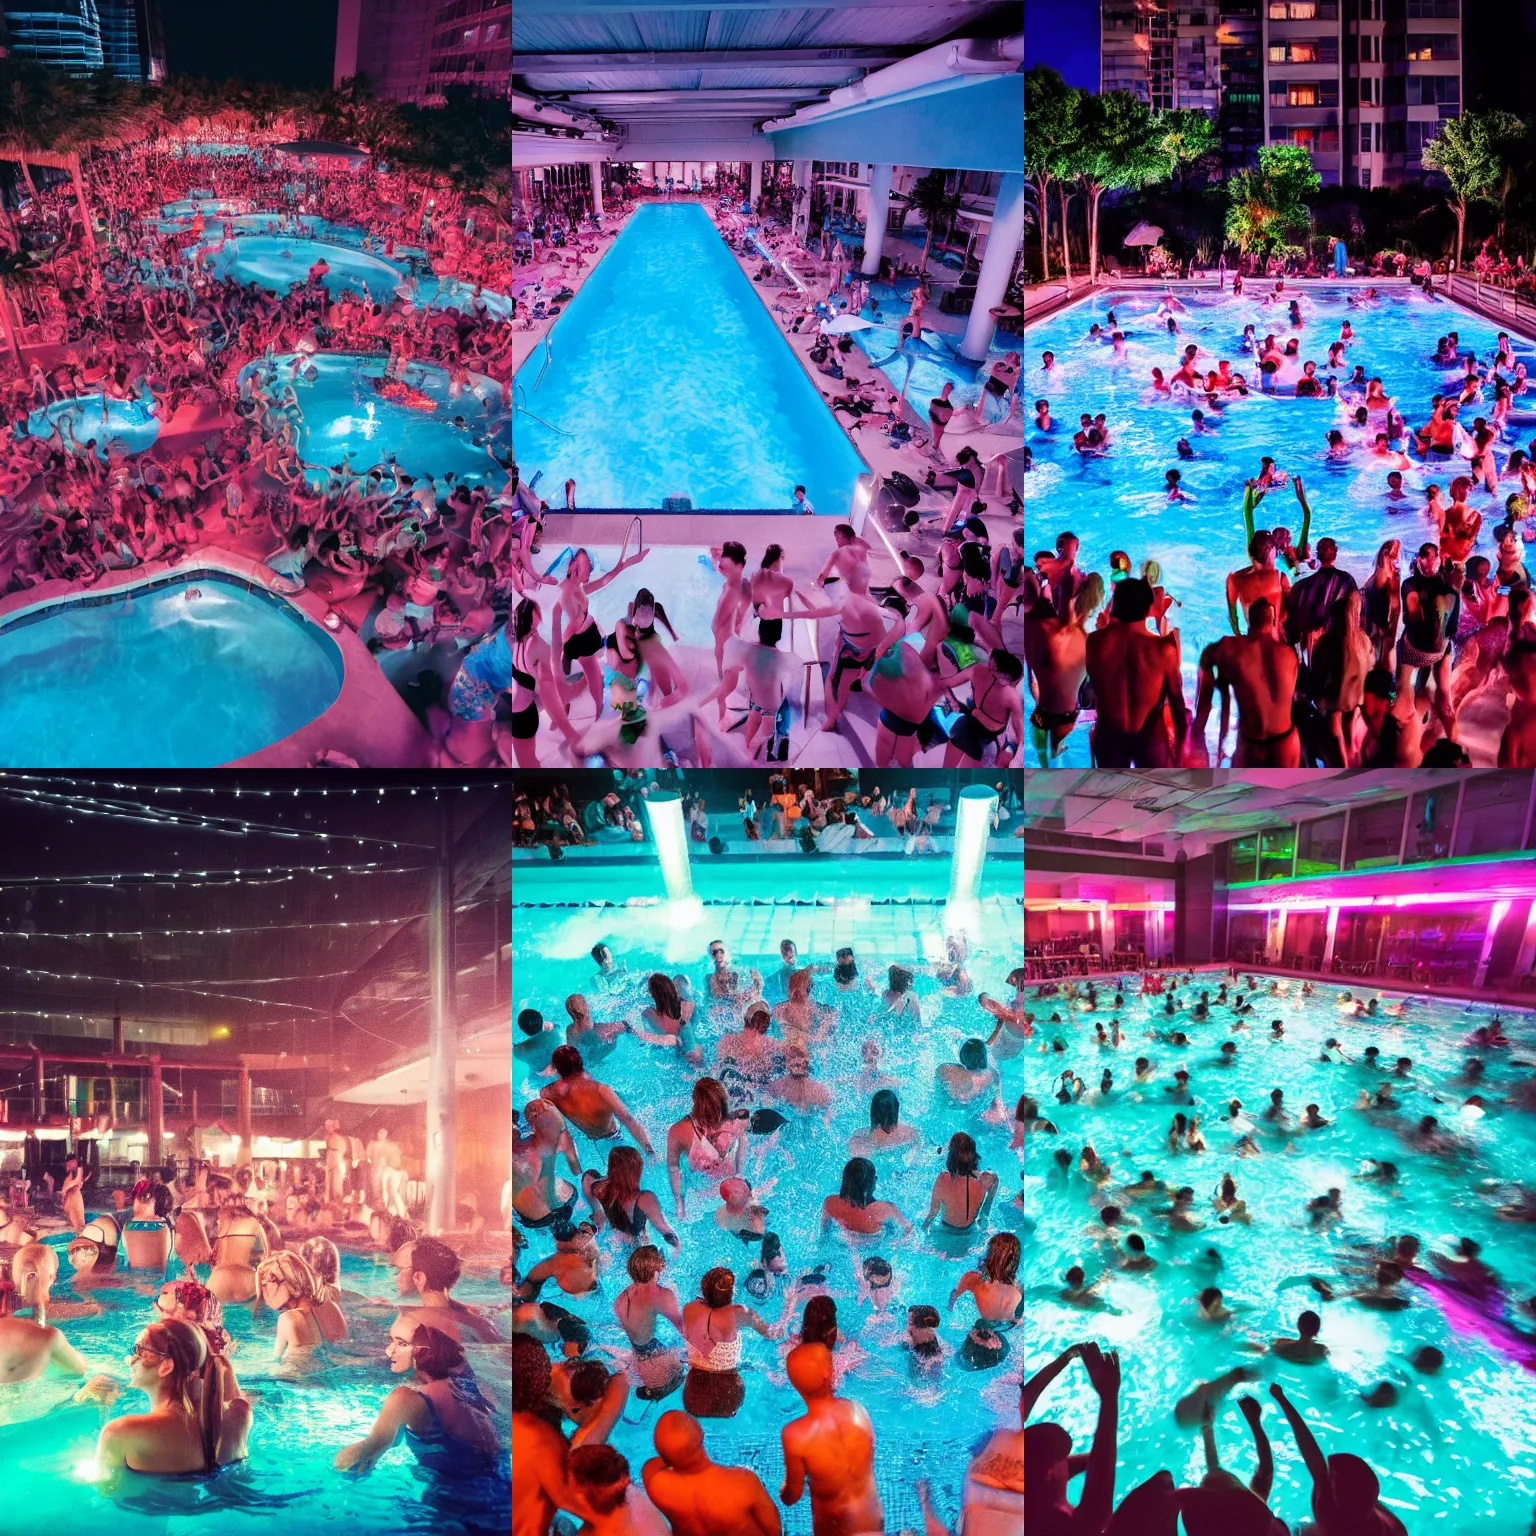 Prompt: A photo of a pool party filled with people in a modern indoors pool with cyberpunk illumination at night .